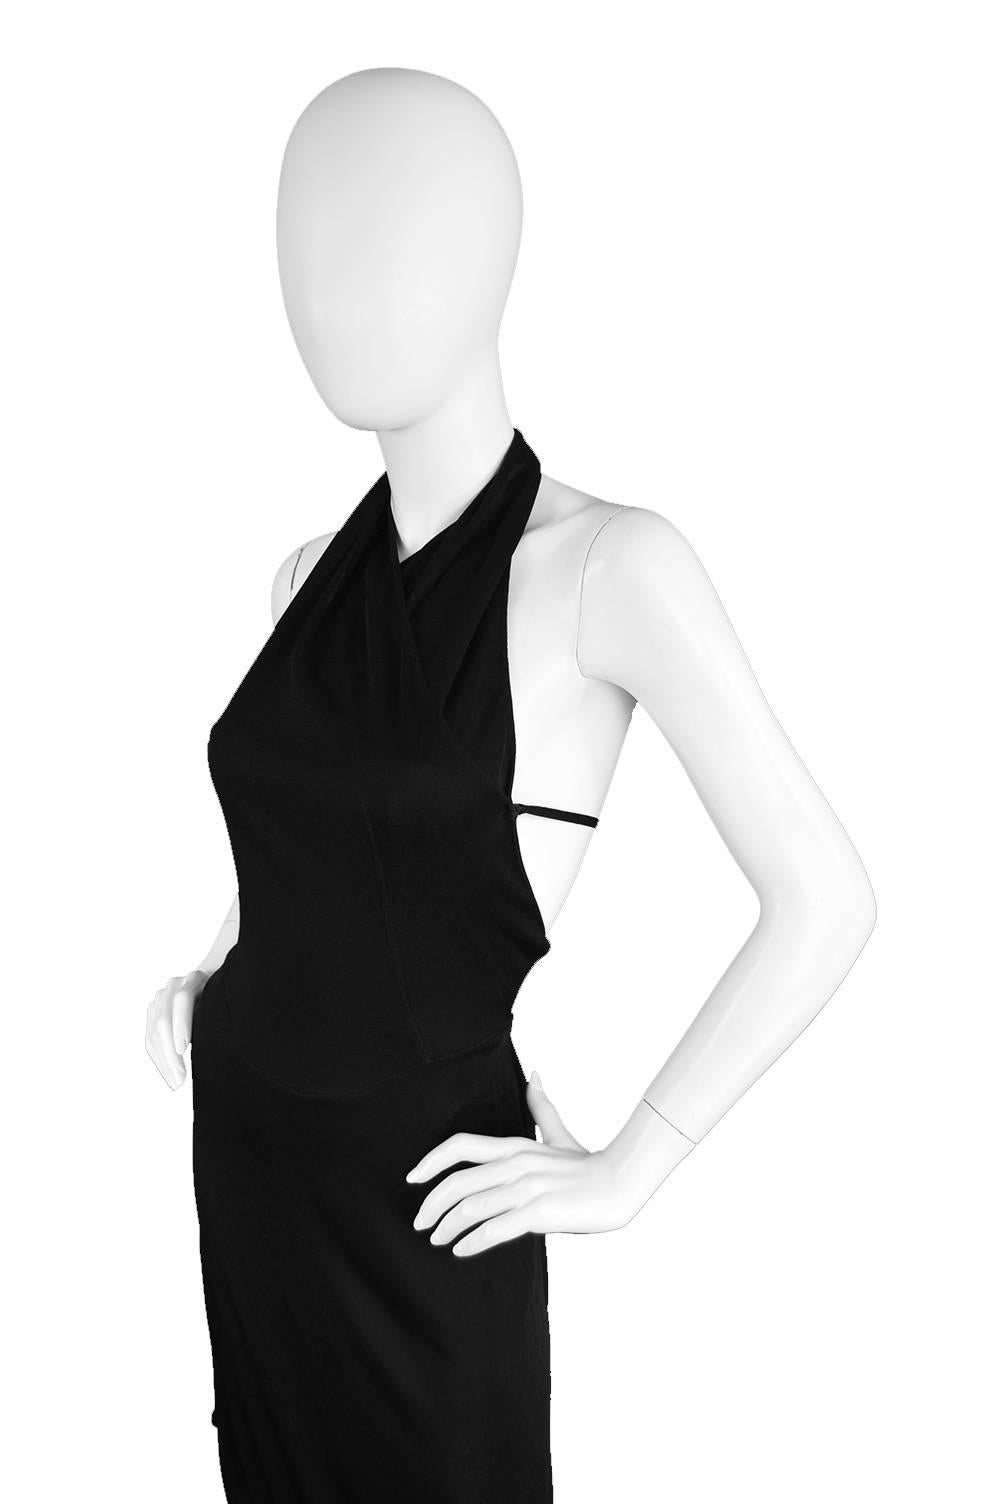 An incredibly sexy vintage little black dress from c. 1990s by master of dressing the feminine form, Azzedine Alaïa. In a rayon jersey knit which creates incredible drape and form, with his signature deep, scooped back all the way down with only